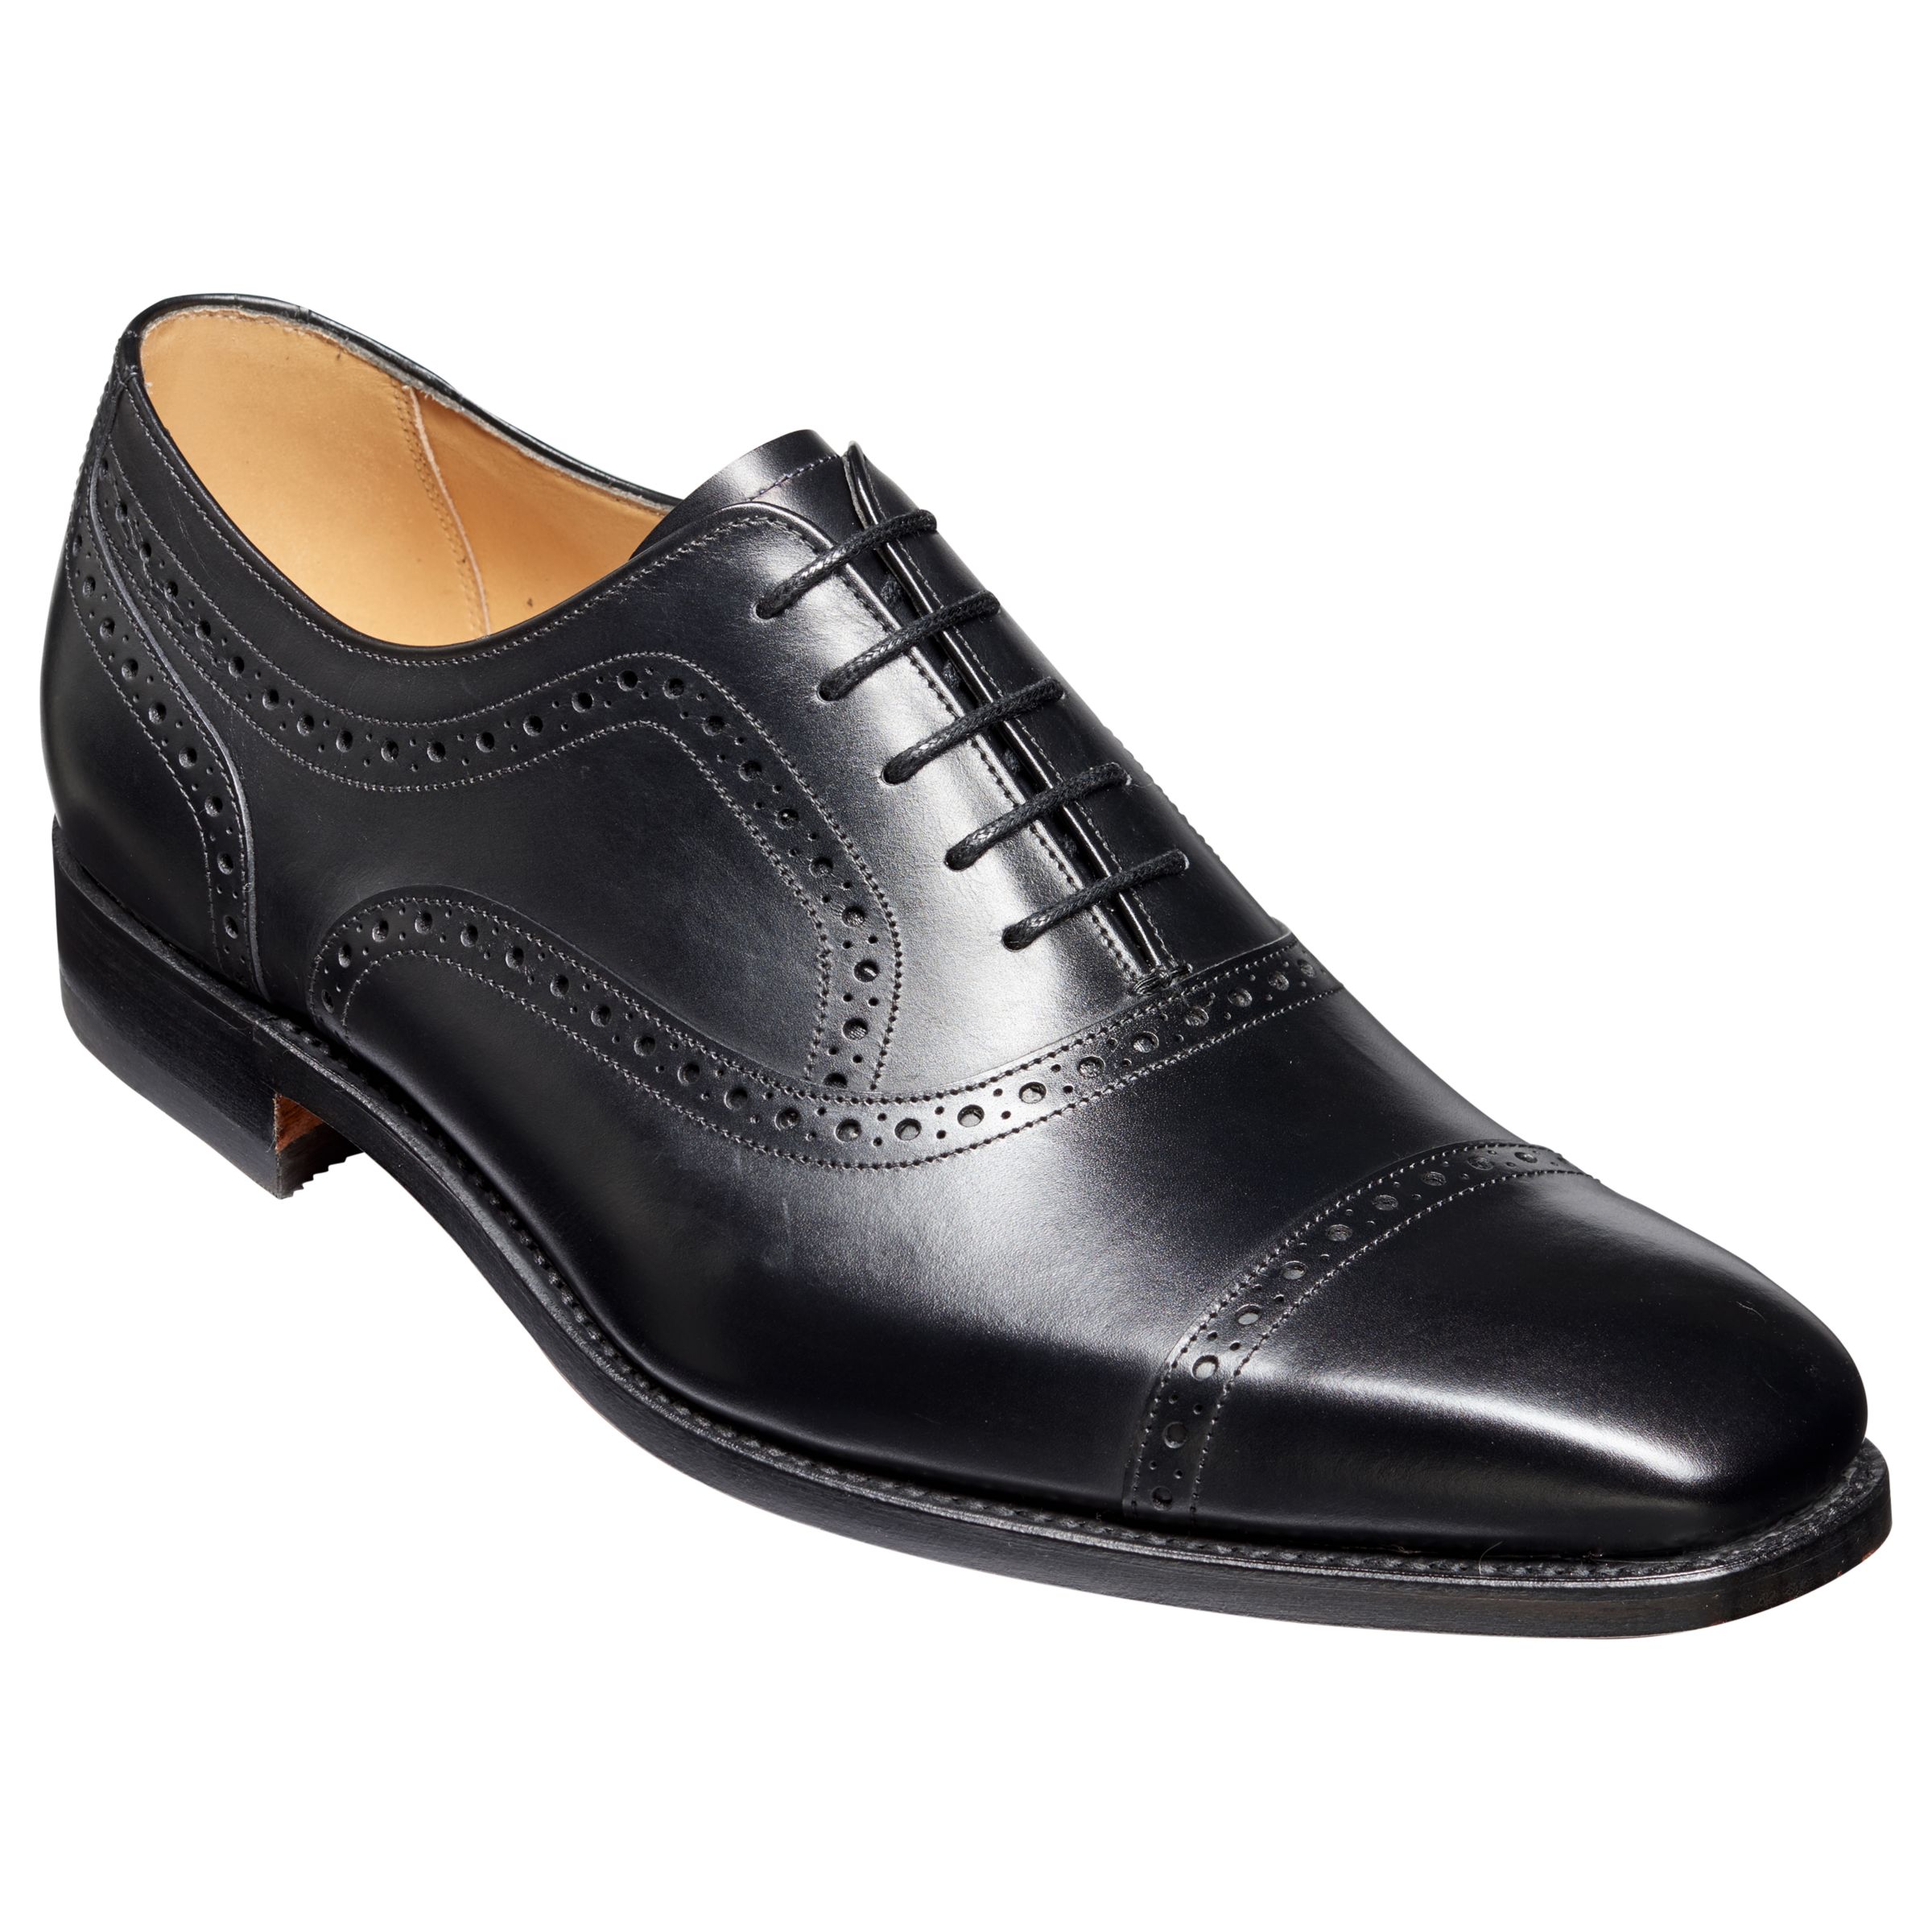 Barker Luke Leather Goodyear Welted Brogues, Black